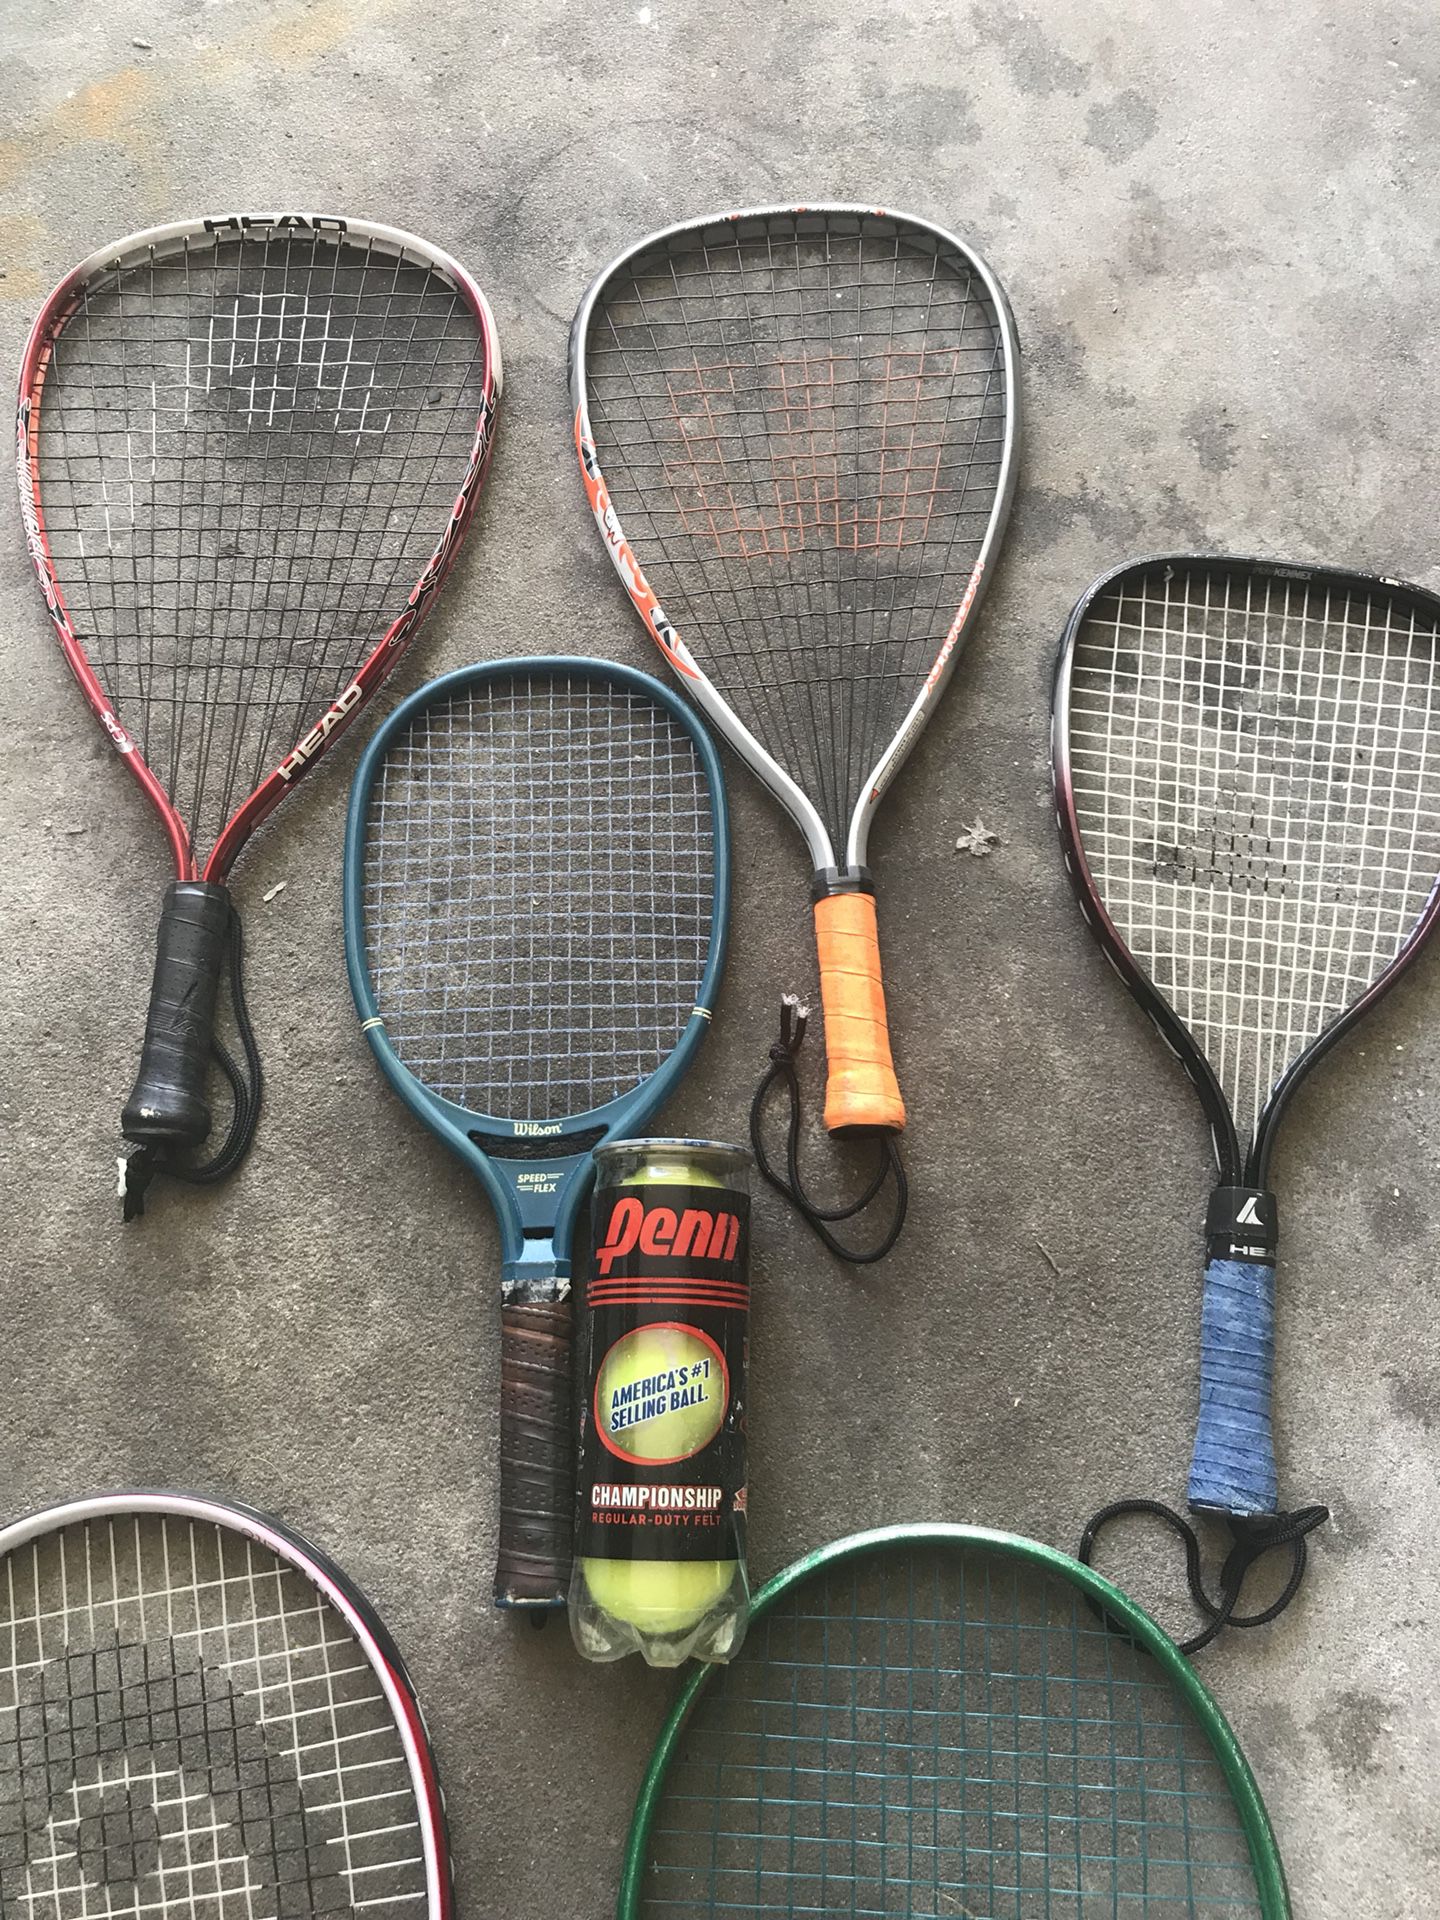 Racket ball and tennis rackets with bag